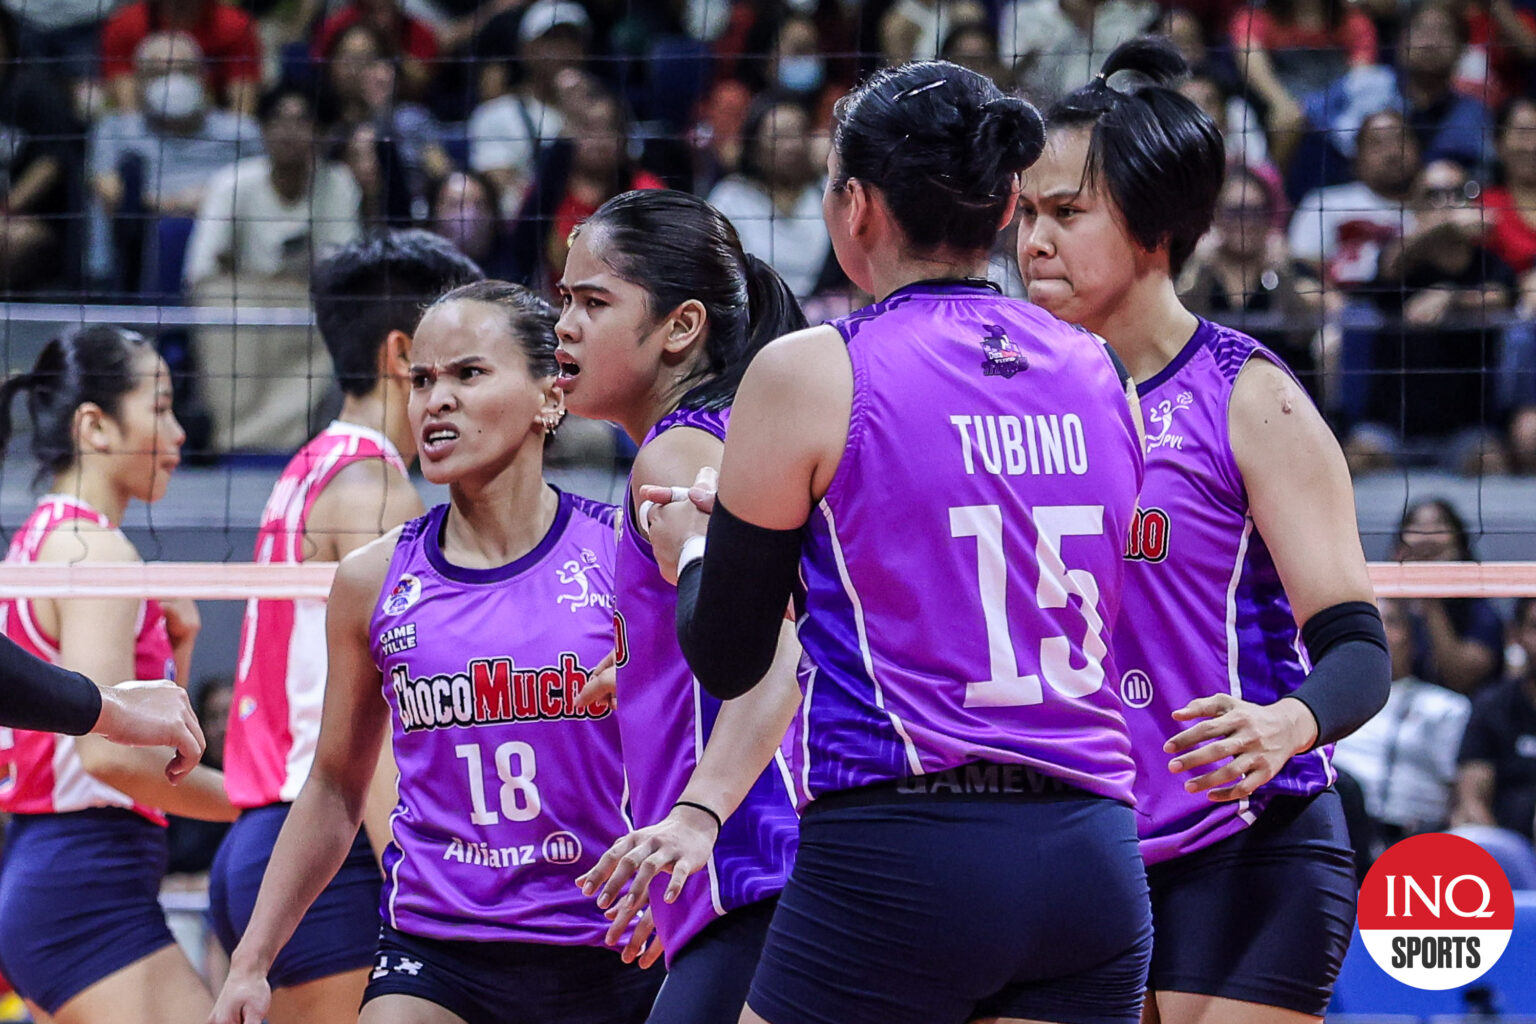 PVL: Fighting for life, Choco Mucho looks to schedule a Game 3